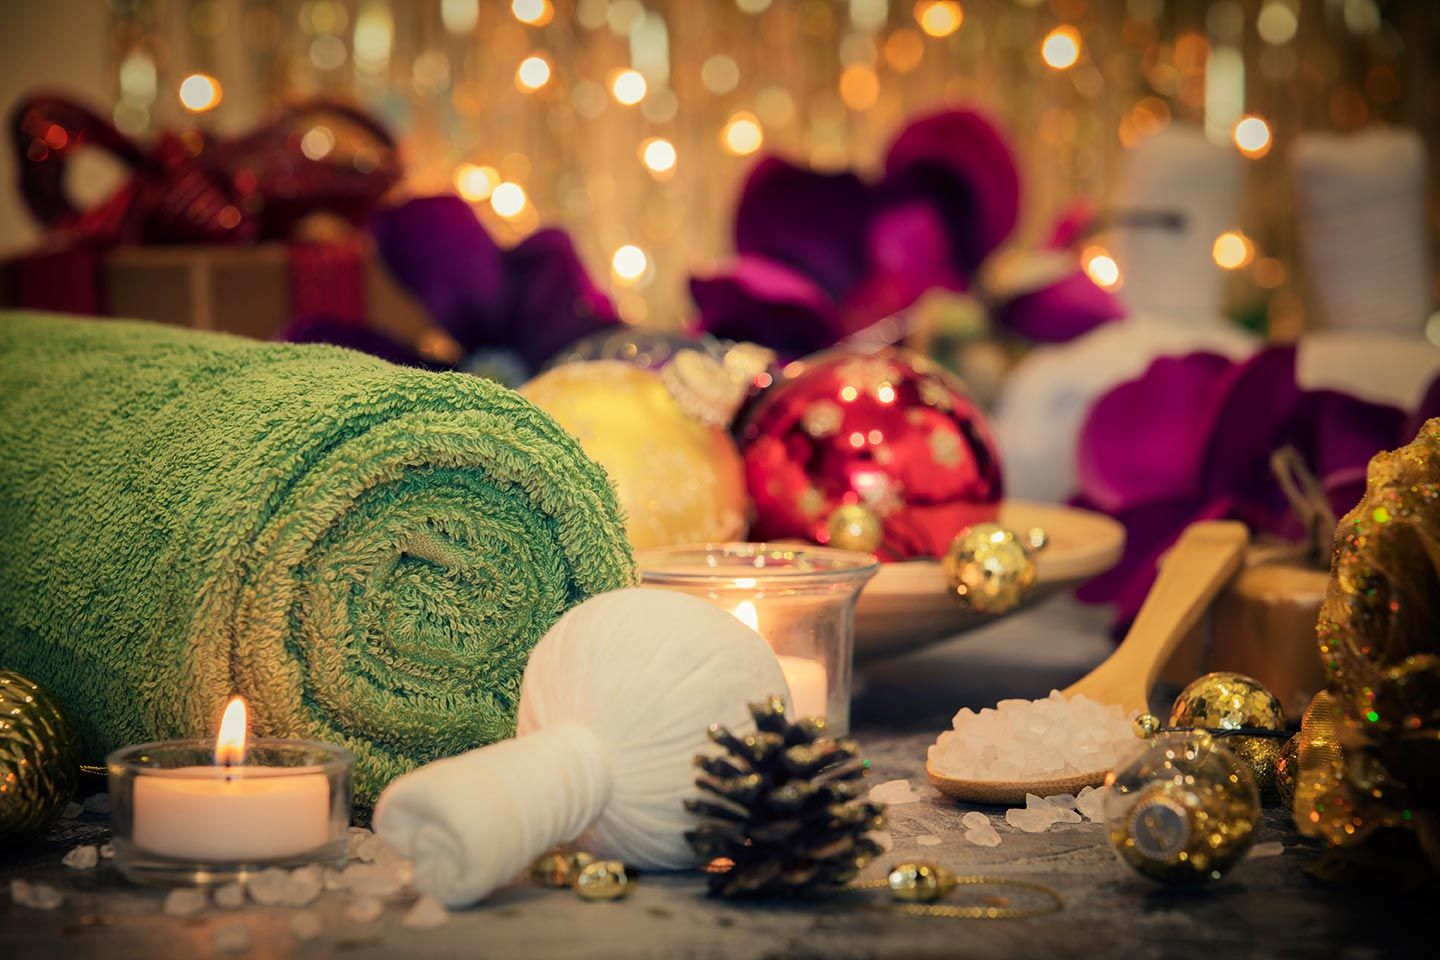 Christmas Packages 2021 at Aristocracy Salon & Day Spa in Plymouth, MA - Spa Towels, Oils, Salts